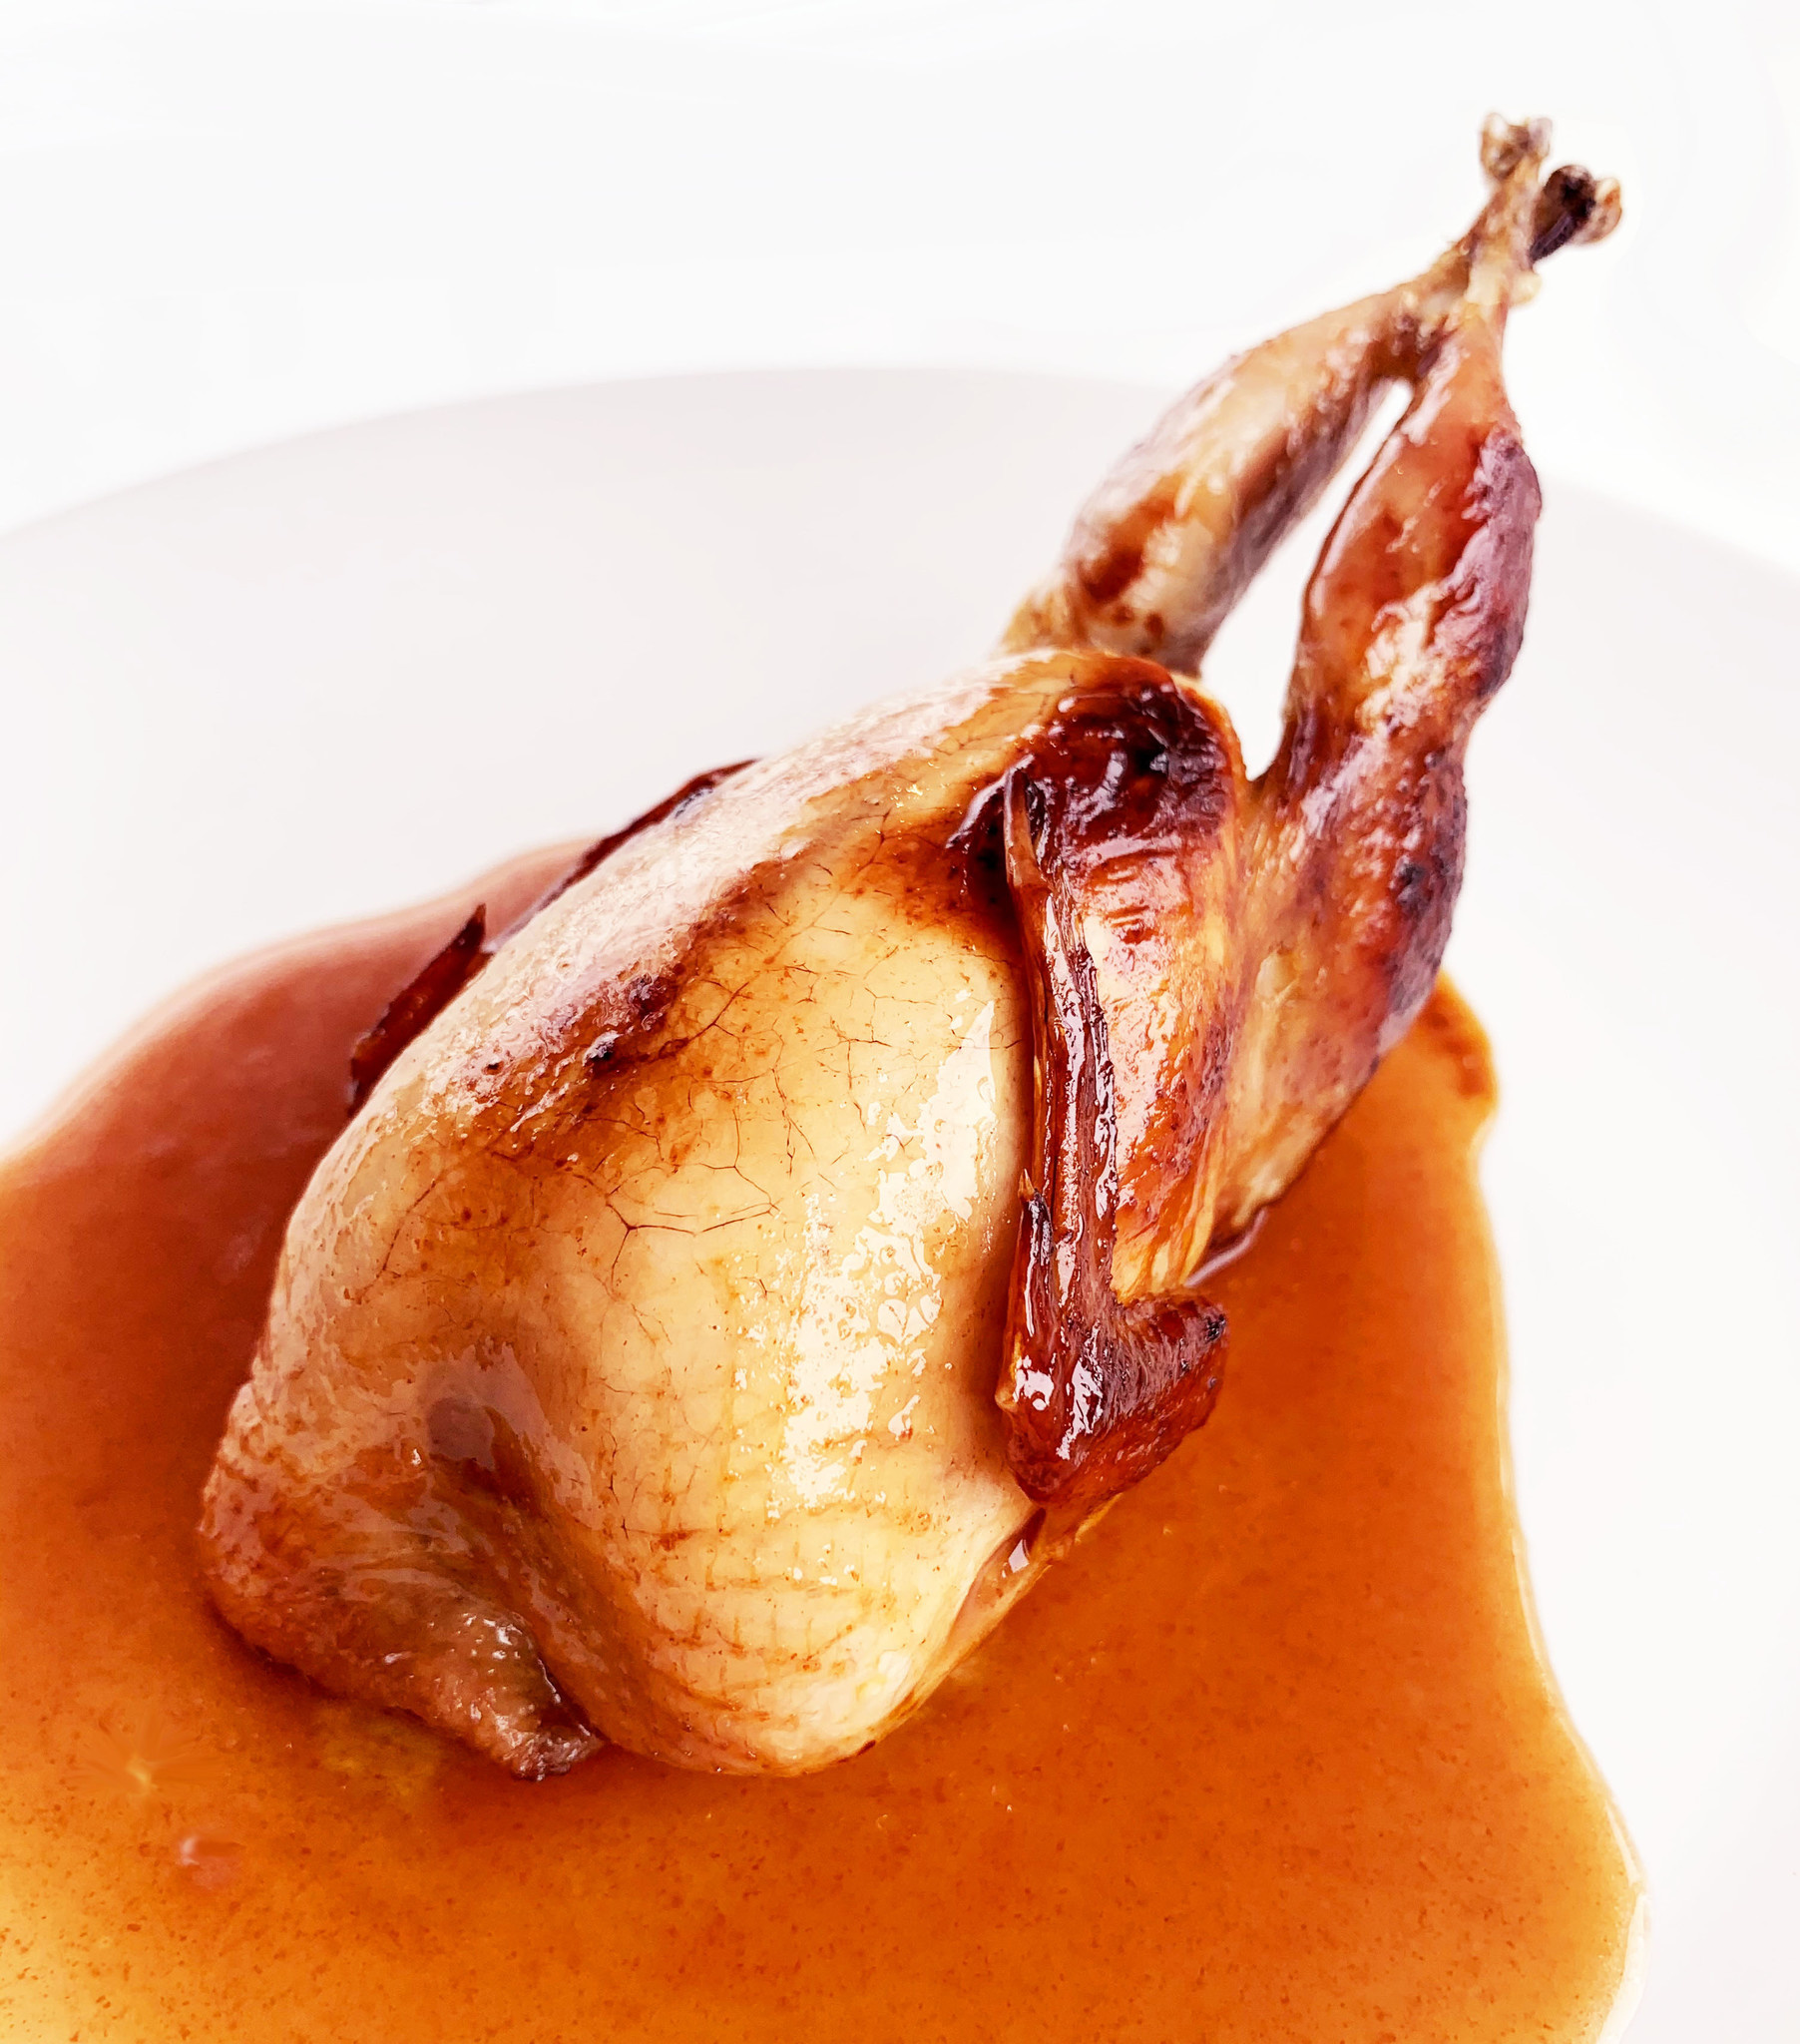 Quail stuffed with poultry liver, porto, maple, apple and walnuts